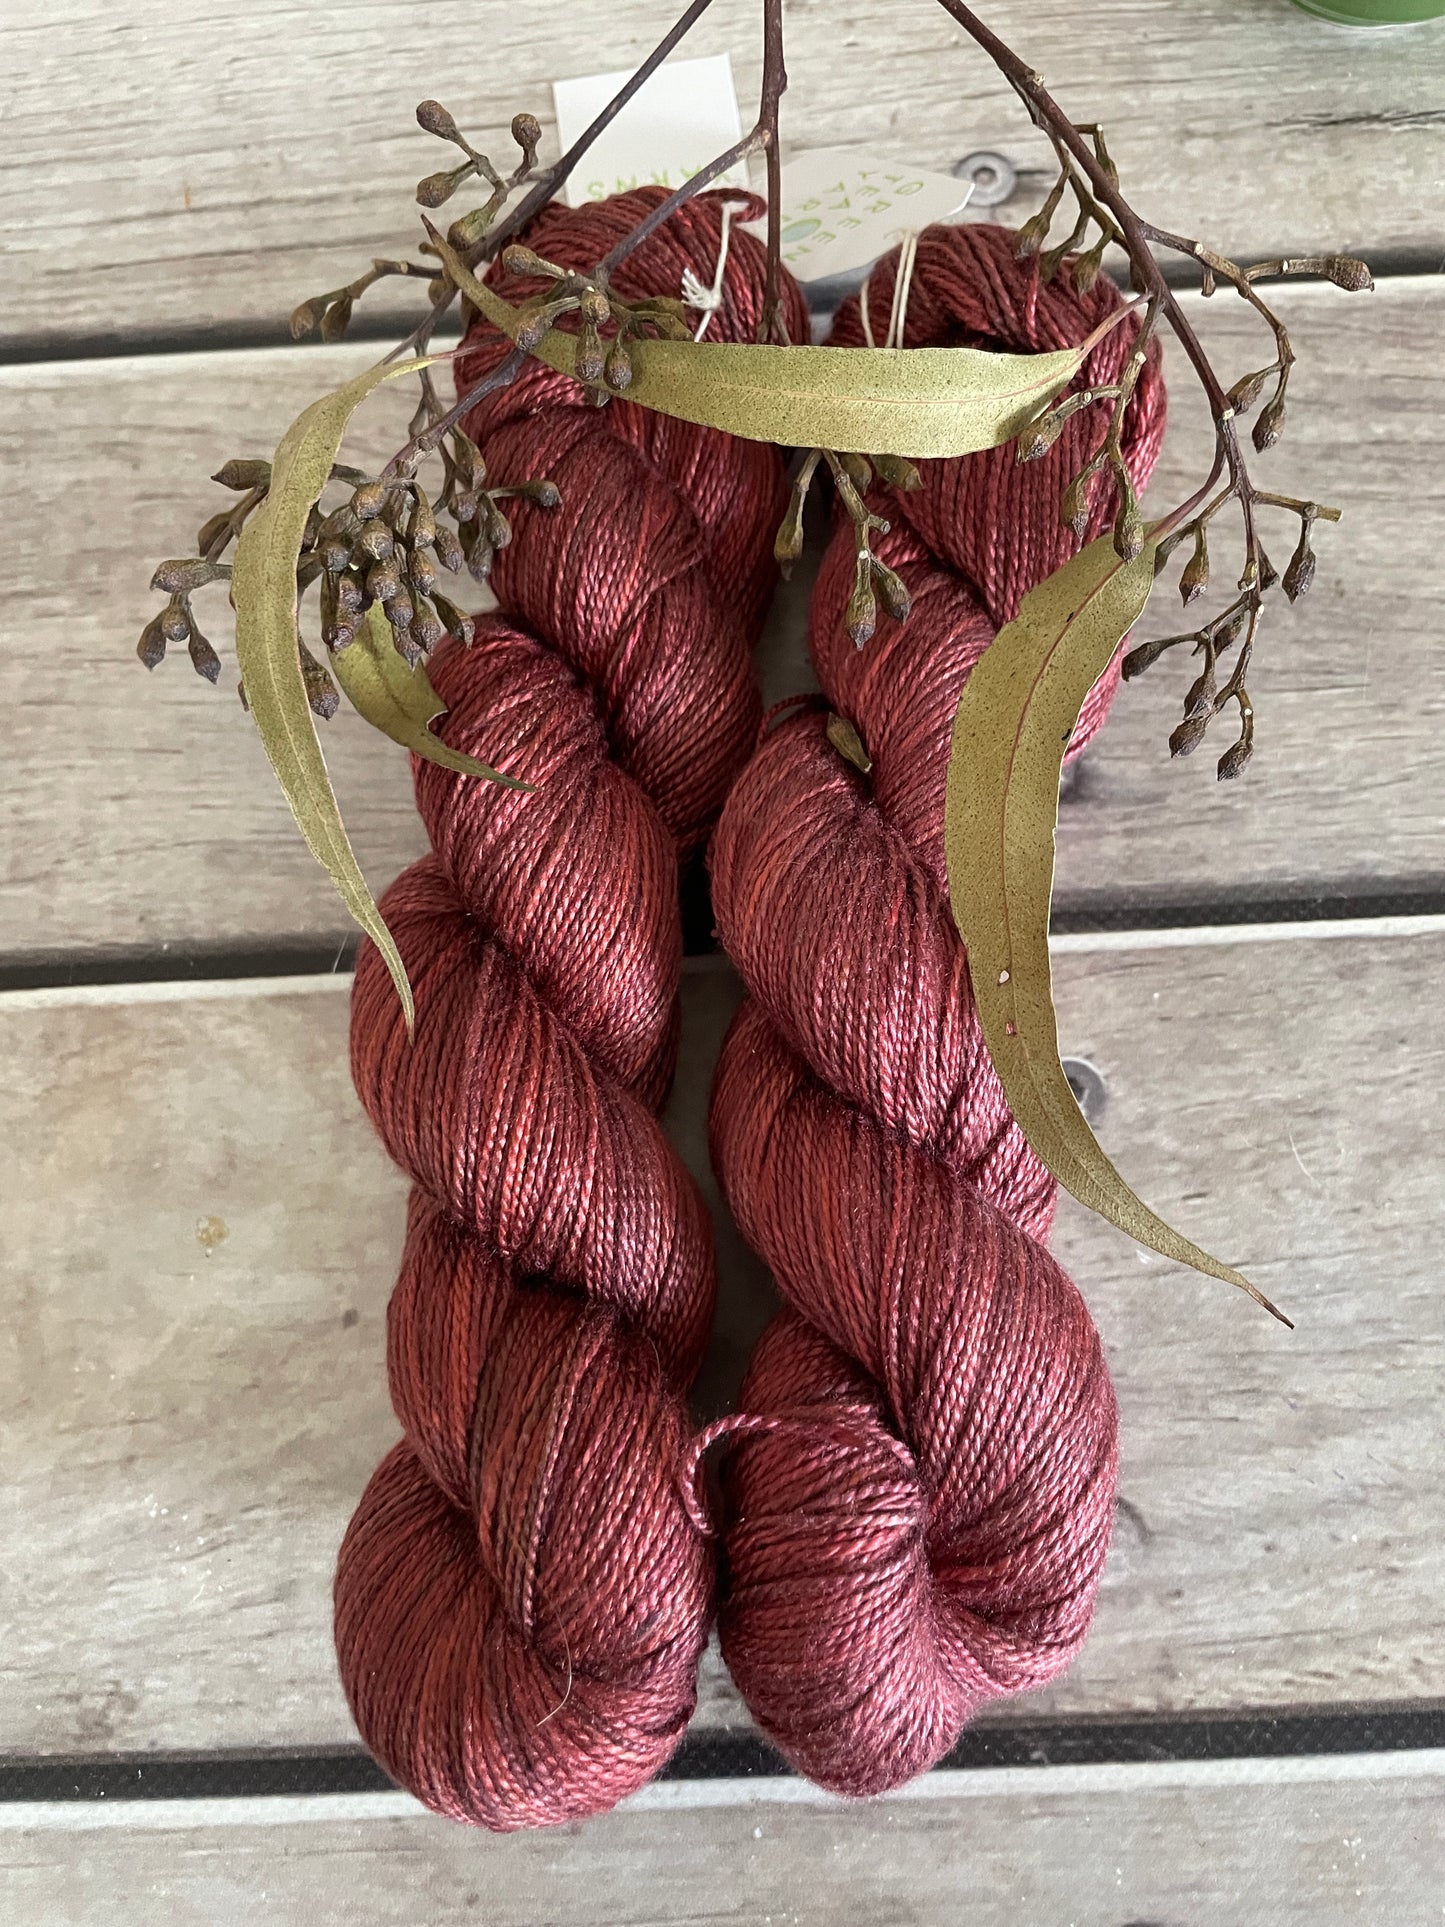 Ming Red - 4 ply in Mulberry silk - Keemun 4 OB